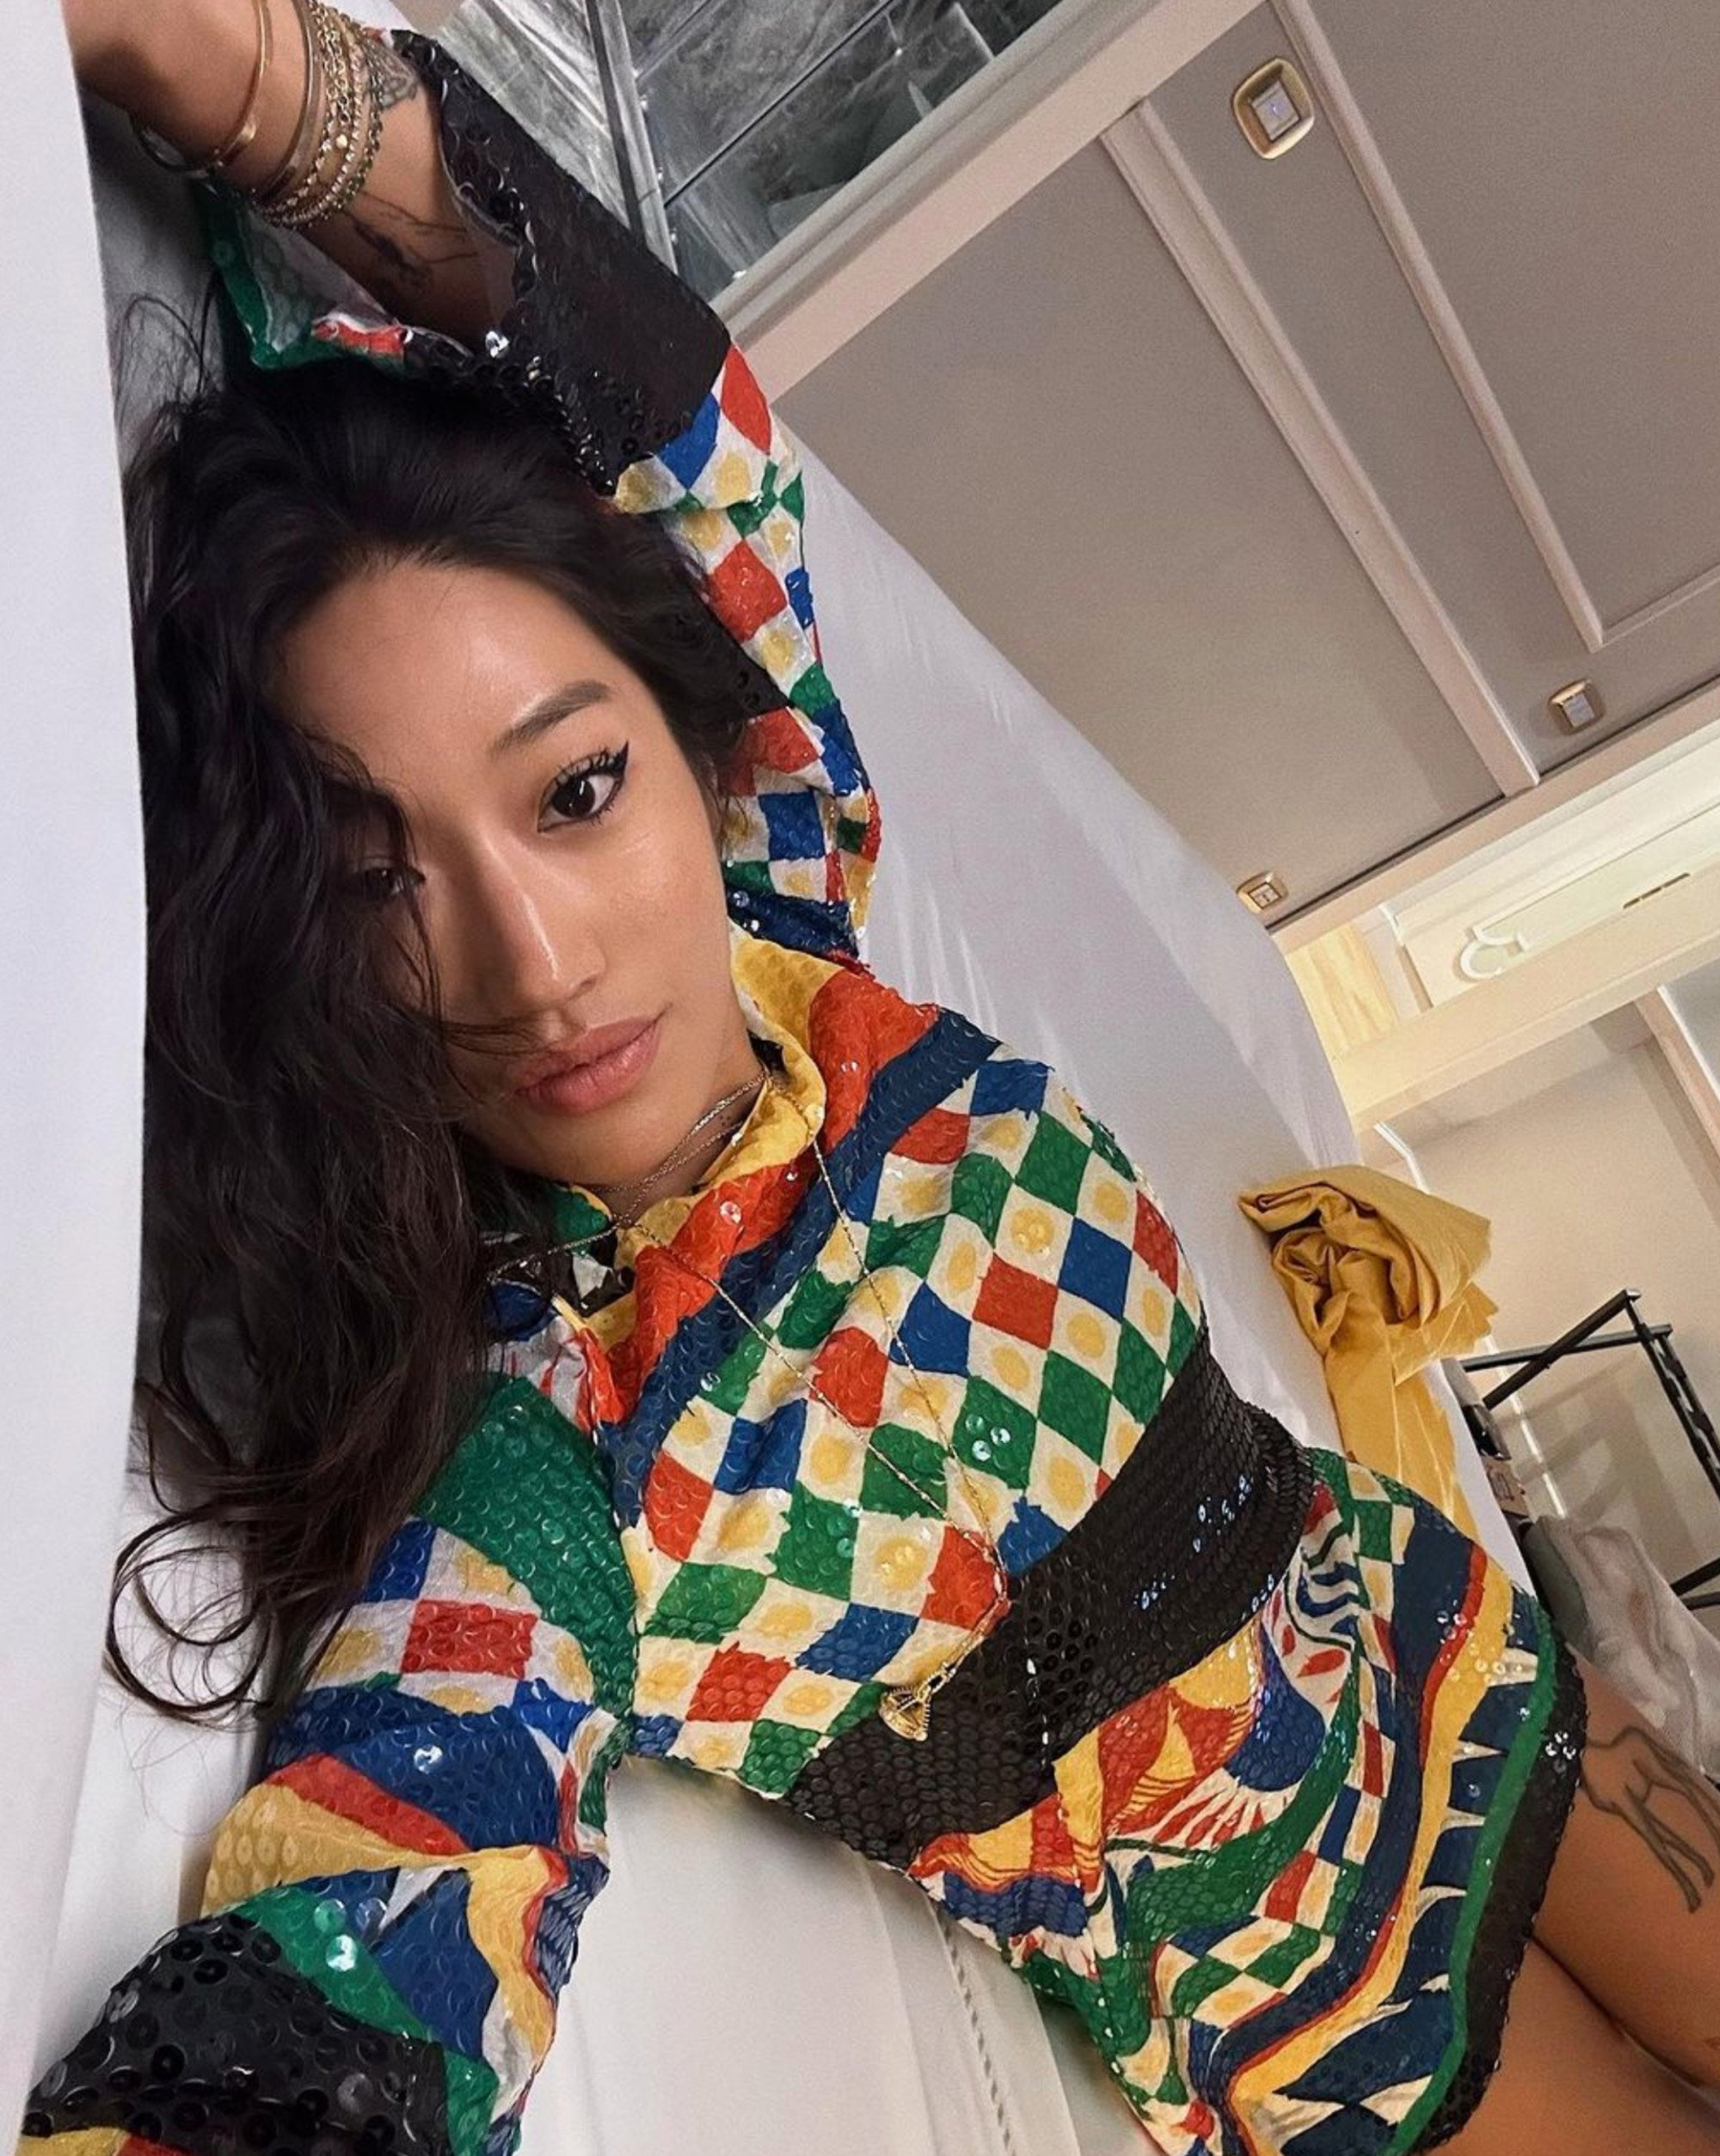 Is Peggy Gou the coolest DJ in the world right now? The South